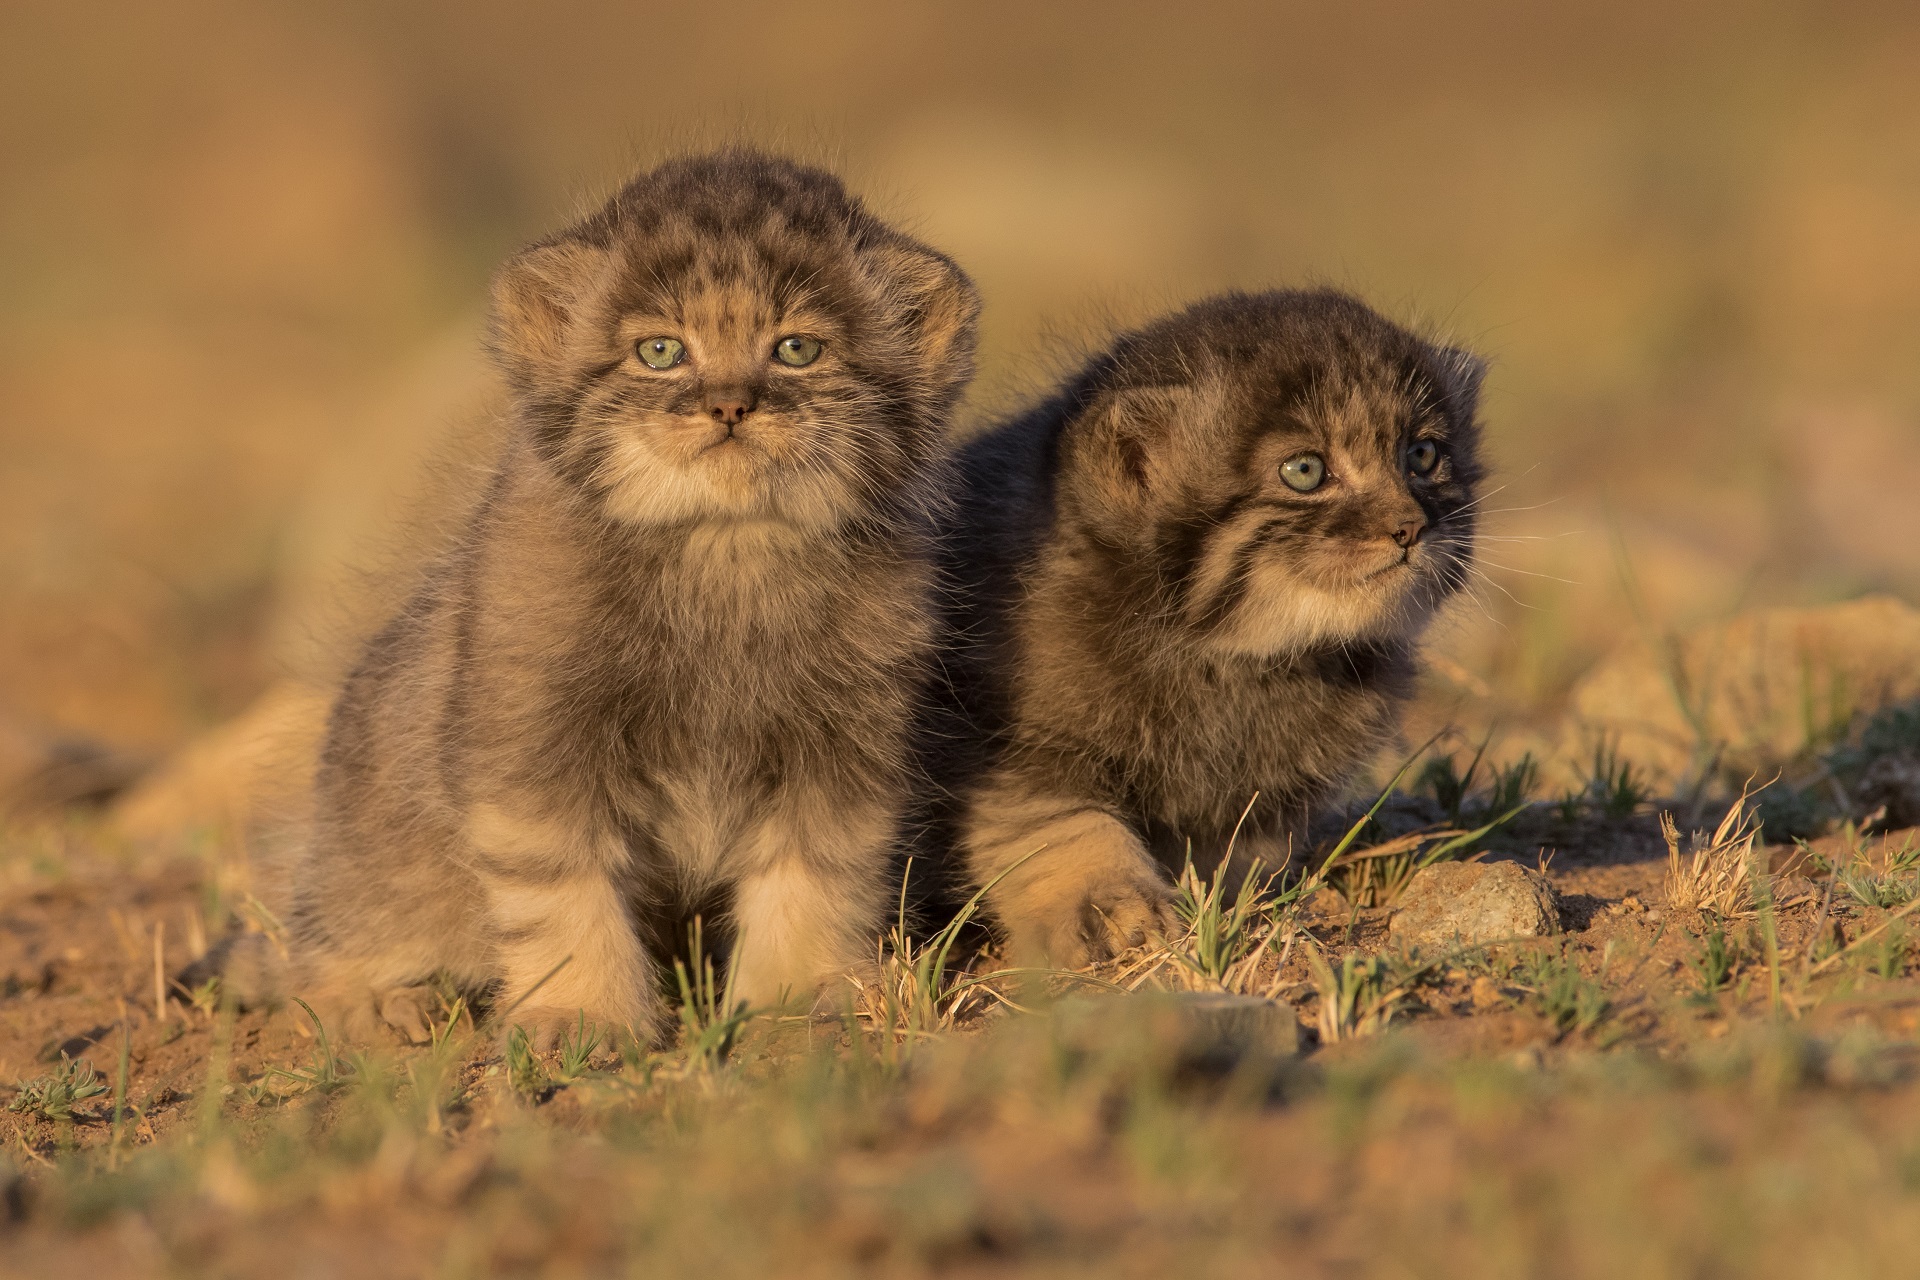 Pallas's cats in the wild

IMAGE: Otgonbayar